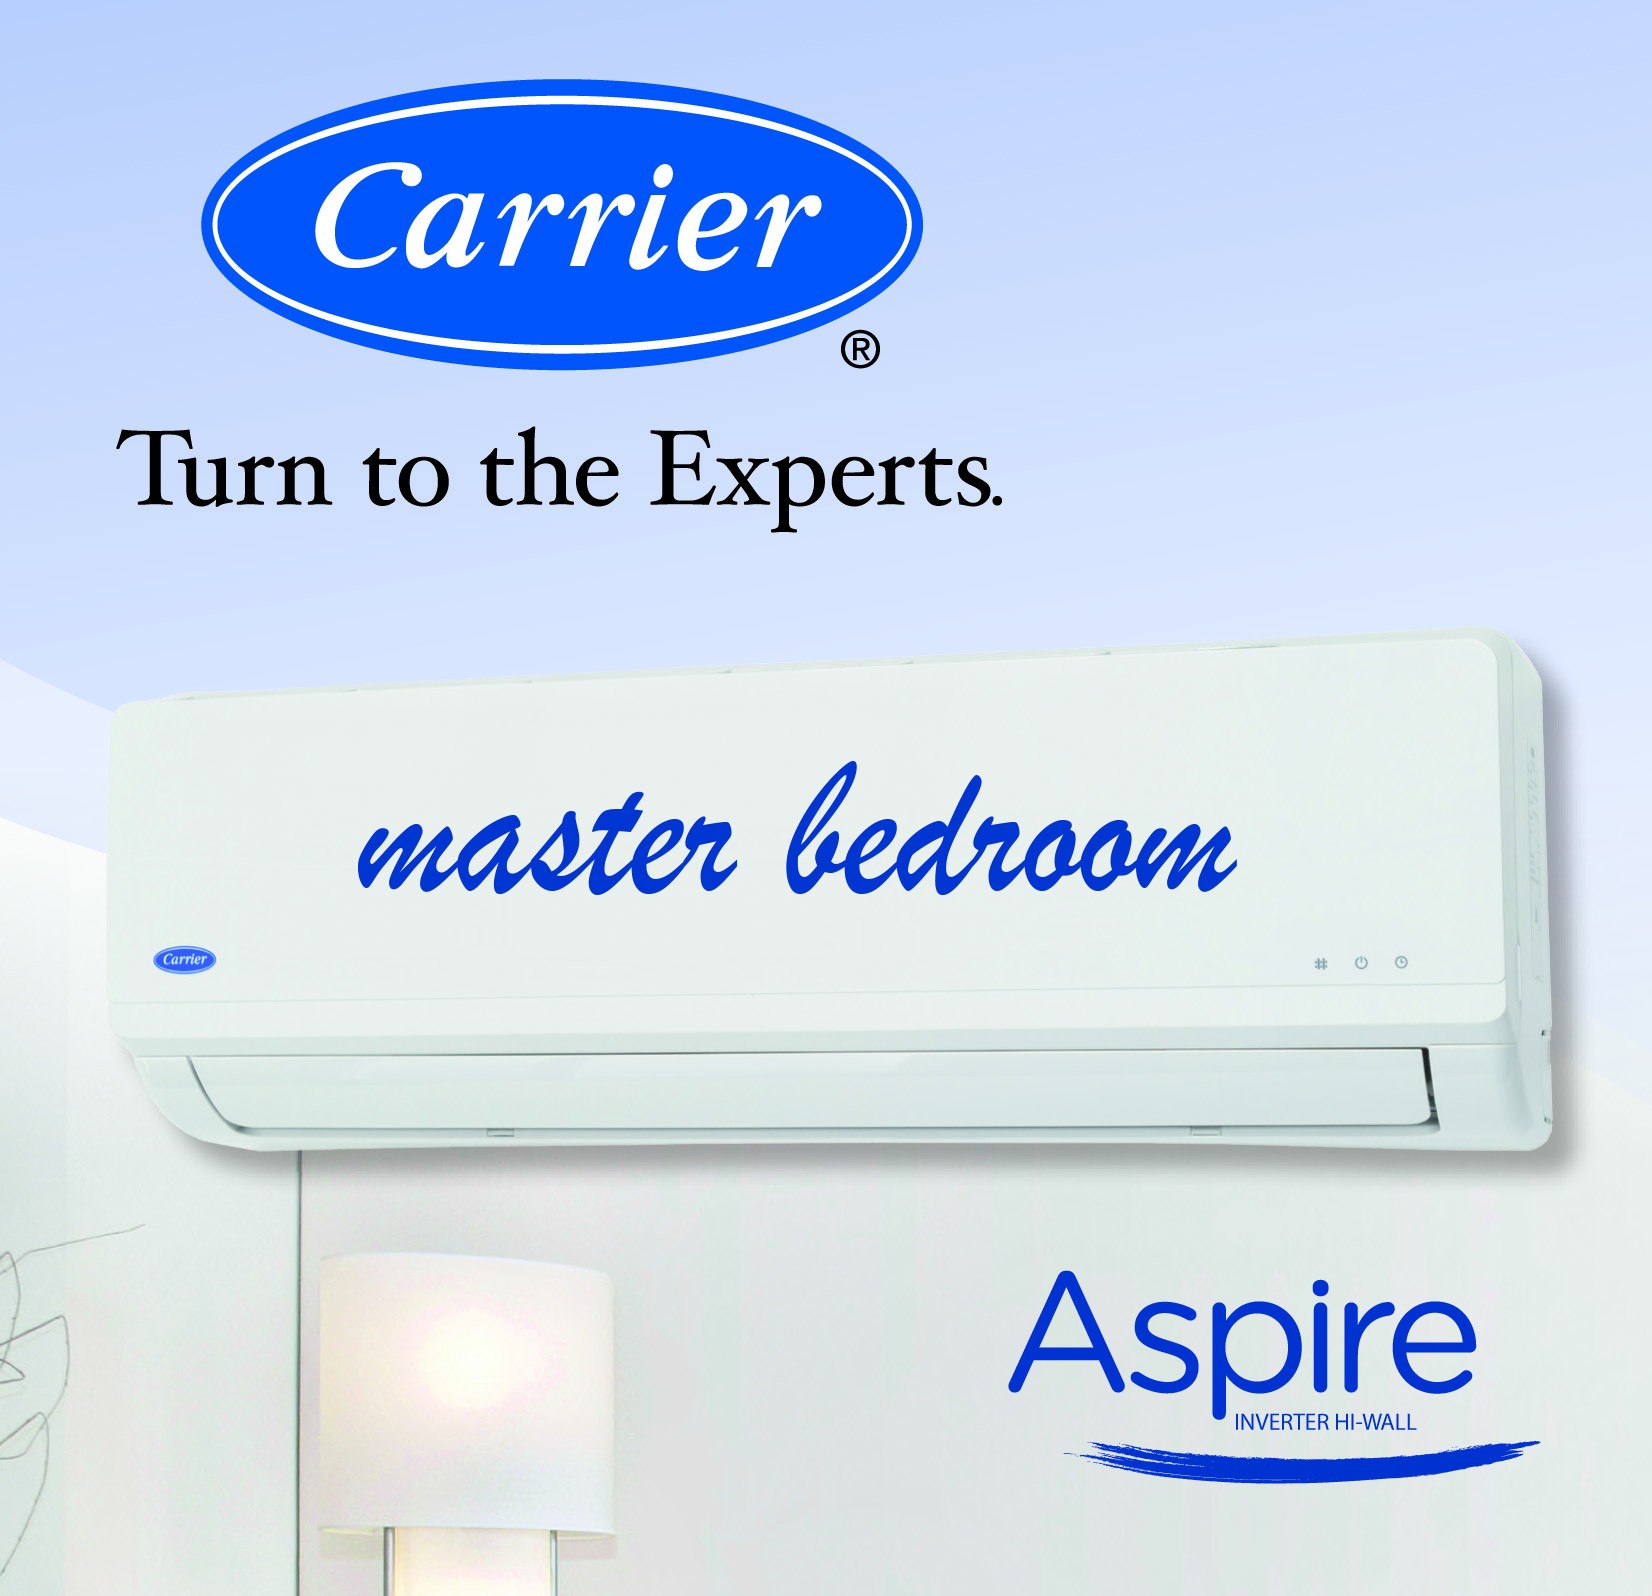 Carrier Aspire Inverter Hi-Wall Split Reverse Cycle Heat Pump - 3.60 kW Cooling / 3.80 kW Heating capacity (ideal for master bedrooms)